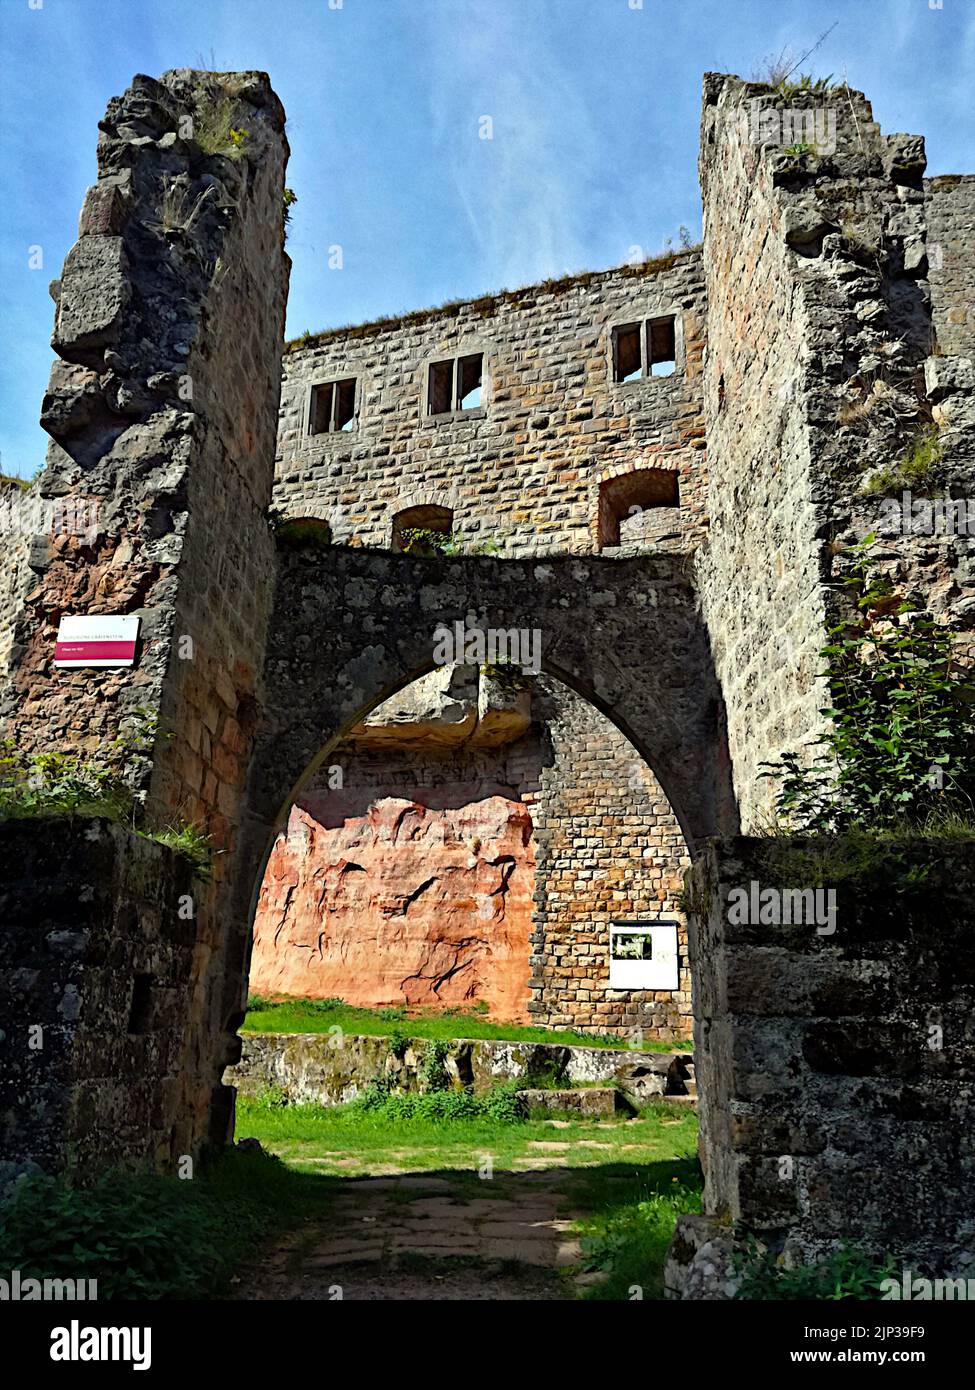 A low angle shot of Grafenstein castle in Merzalben, Germany Stock Photo